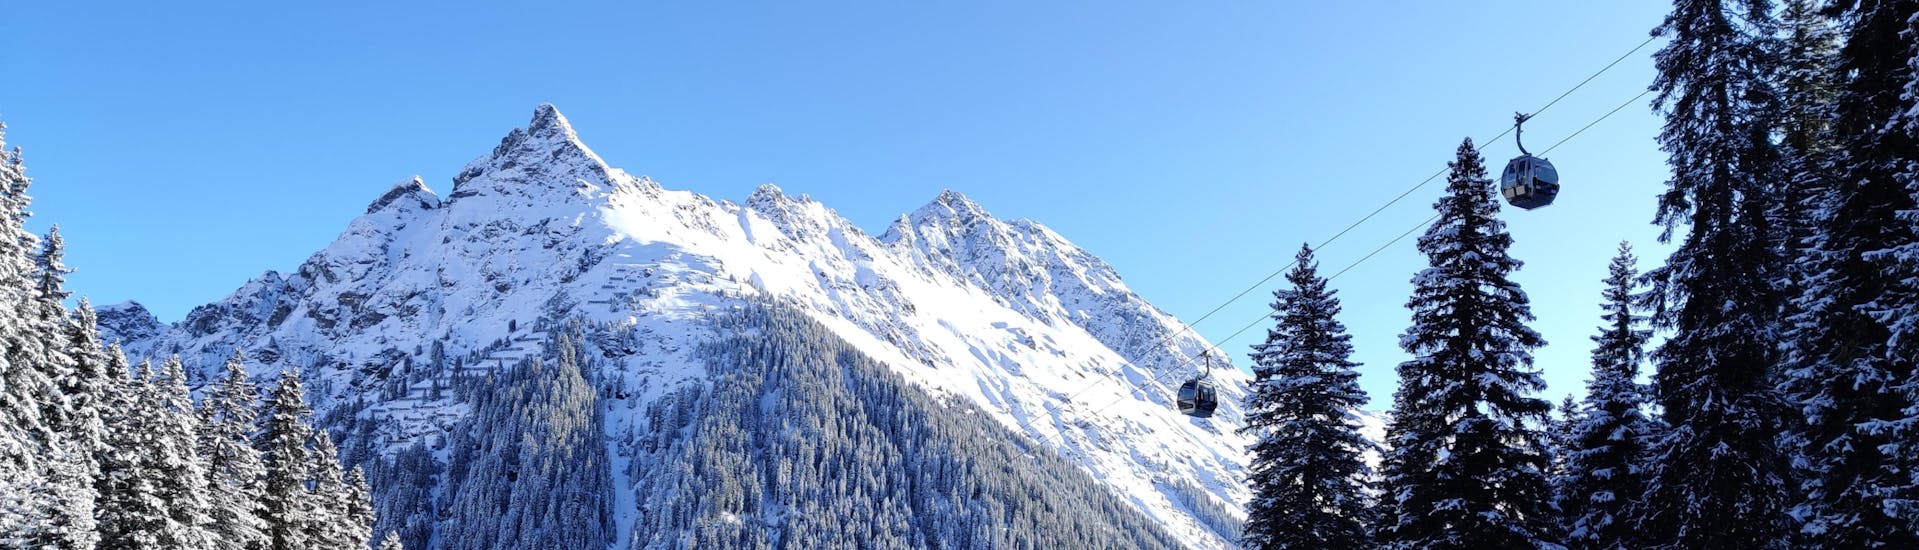 Image of a ski lift going up to the slopes in the ski resort Gargellen in Austria.